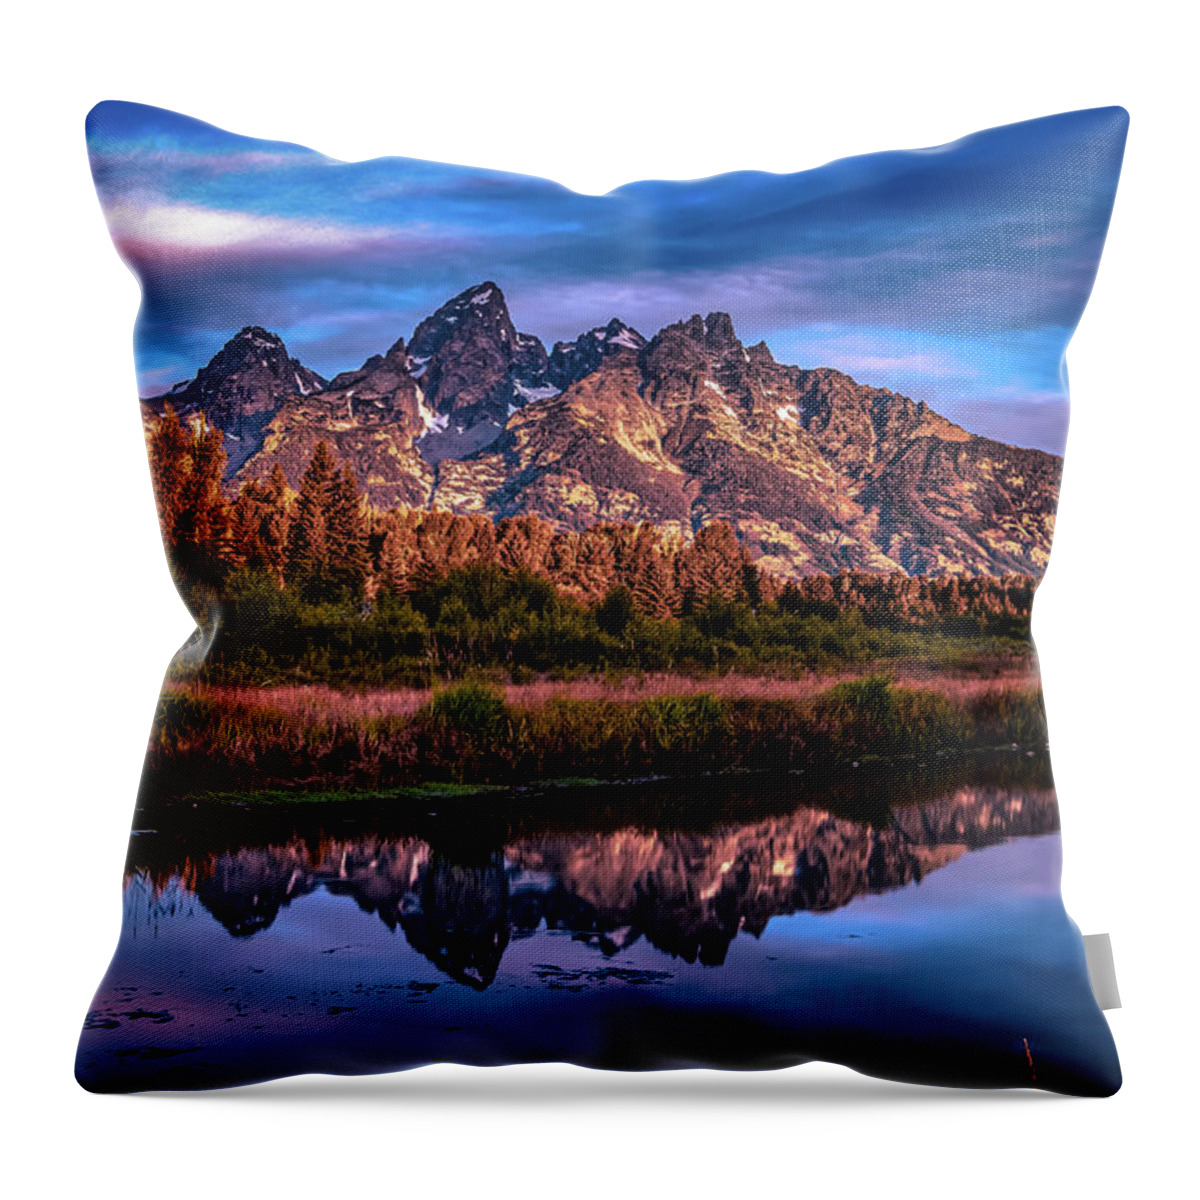 Reflection Throw Pillow featuring the photograph Grand Teton National Park And Mountain Reflections by Alex Grichenko